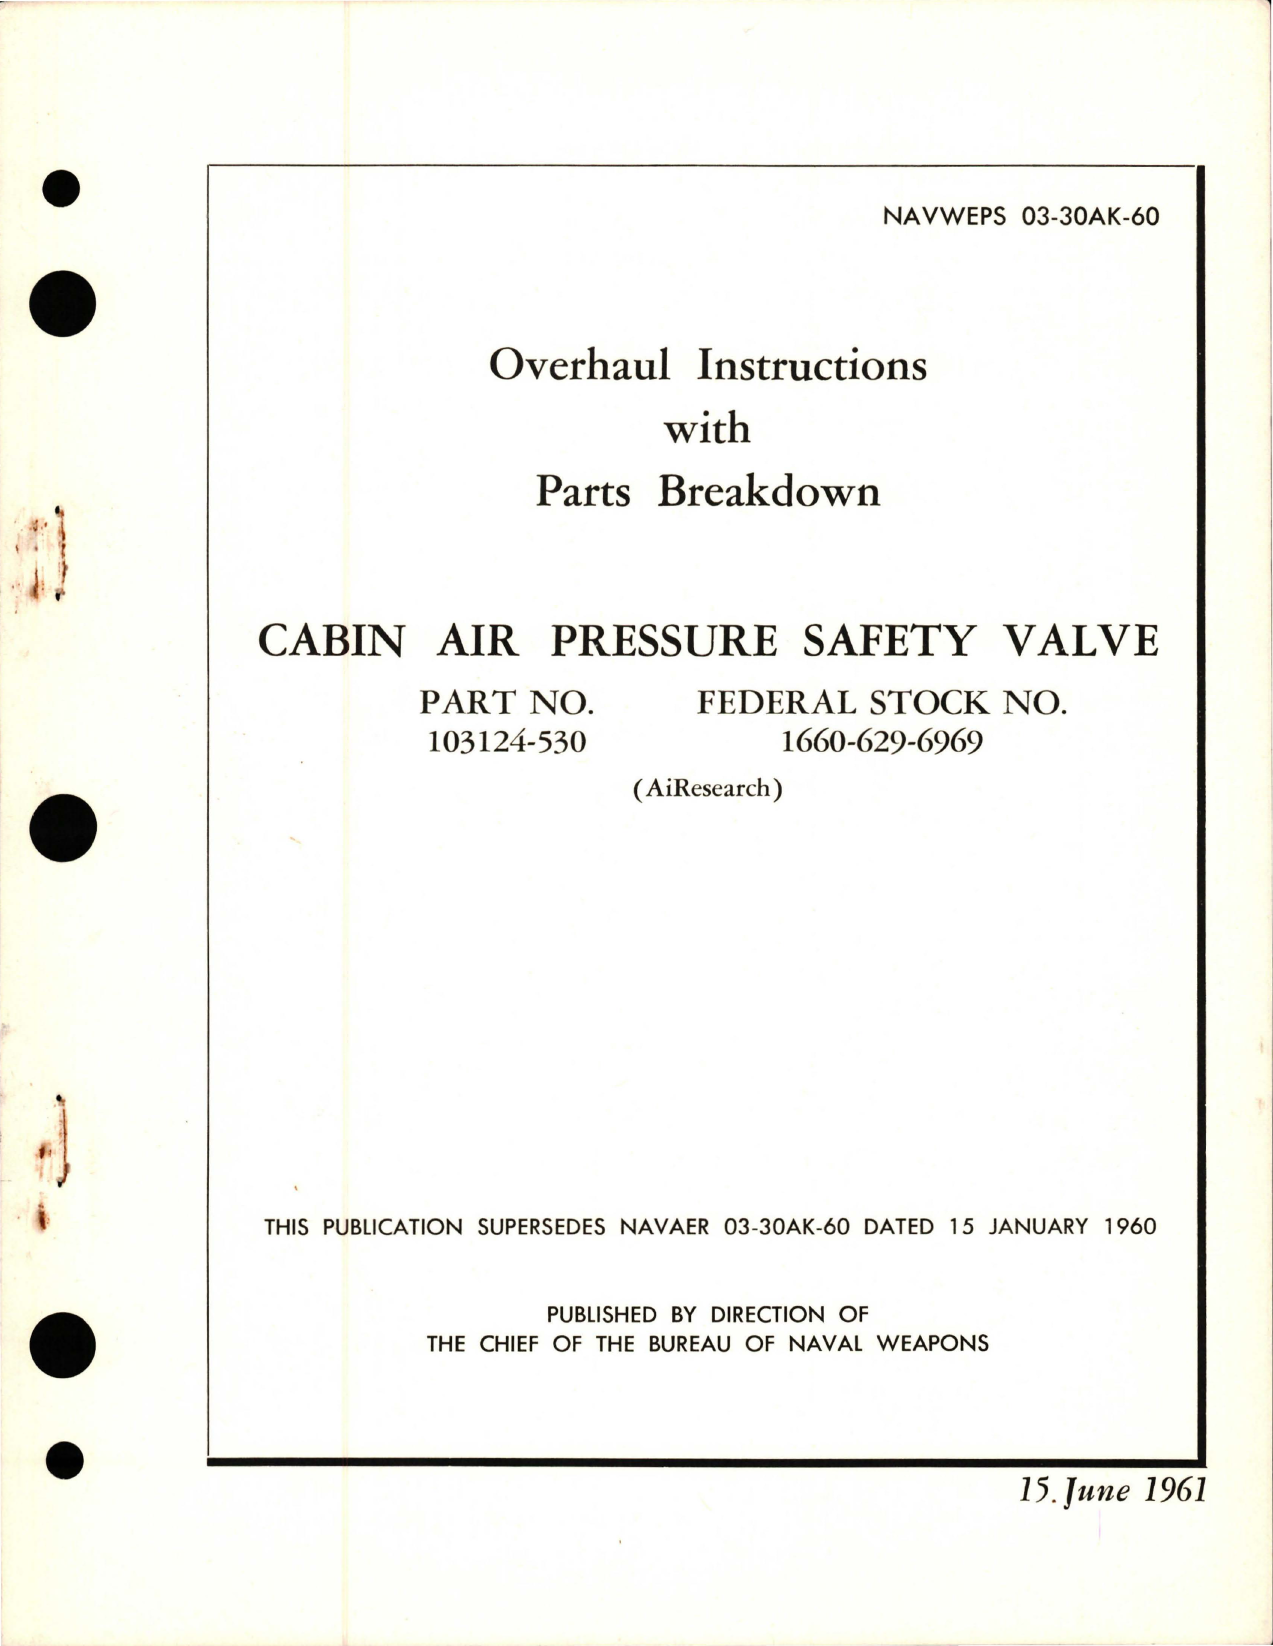 Sample page 1 from AirCorps Library document: Overhaul Instructions with Parts Breakdown for Cabin Air Pressure Safety Valve - Part 103124-530